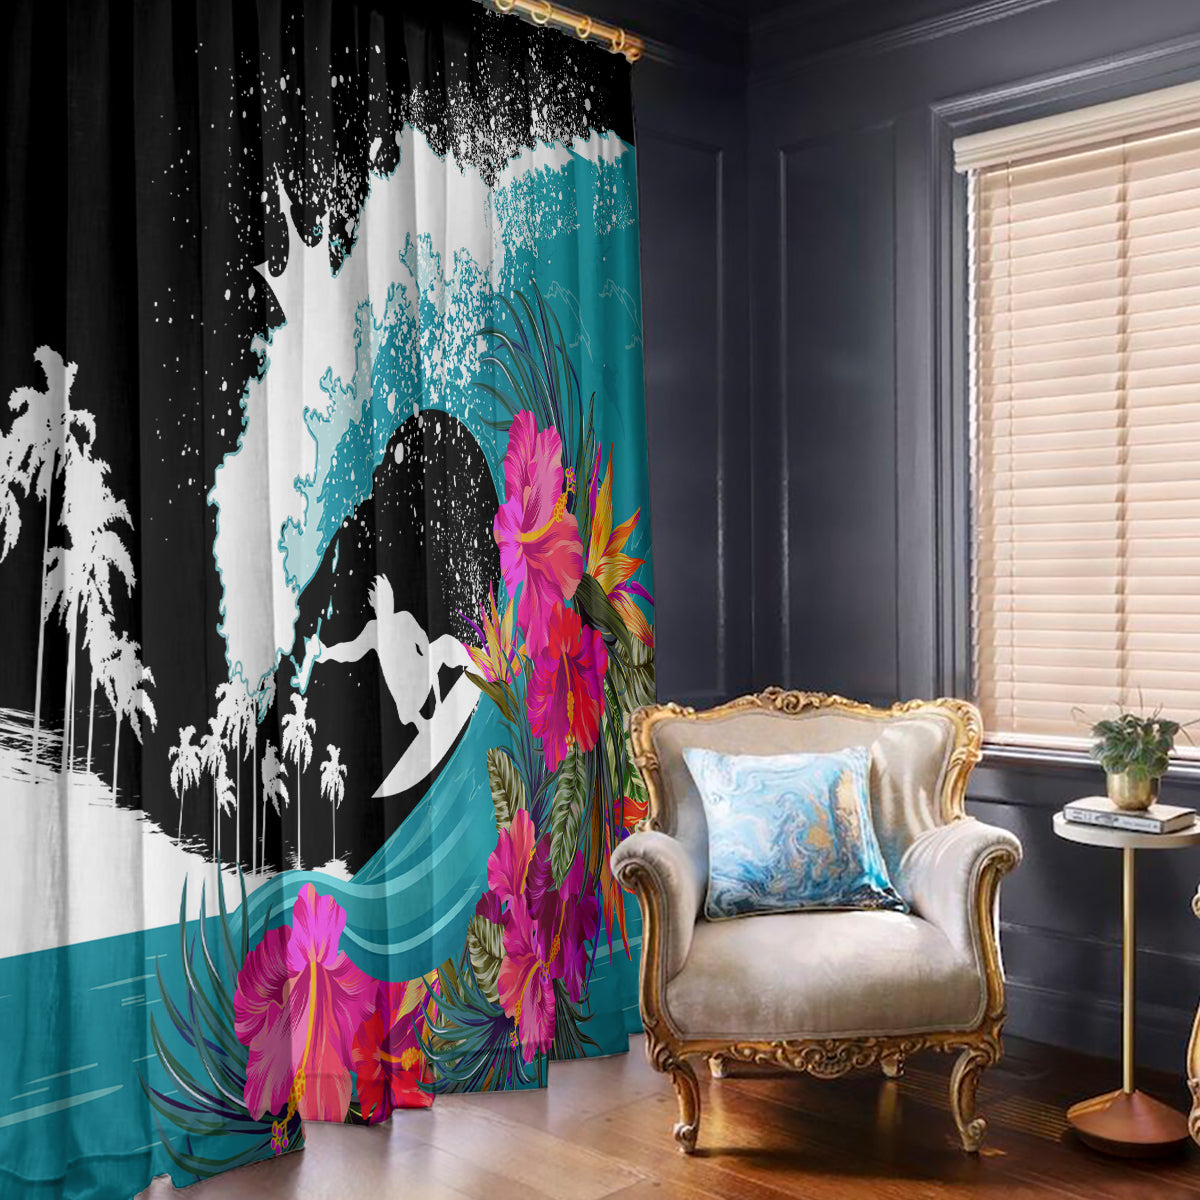 Hawaii Surfing Window Curtain Triple Crown Rides The Waves LT7 With Hooks Black - Polynesian Pride